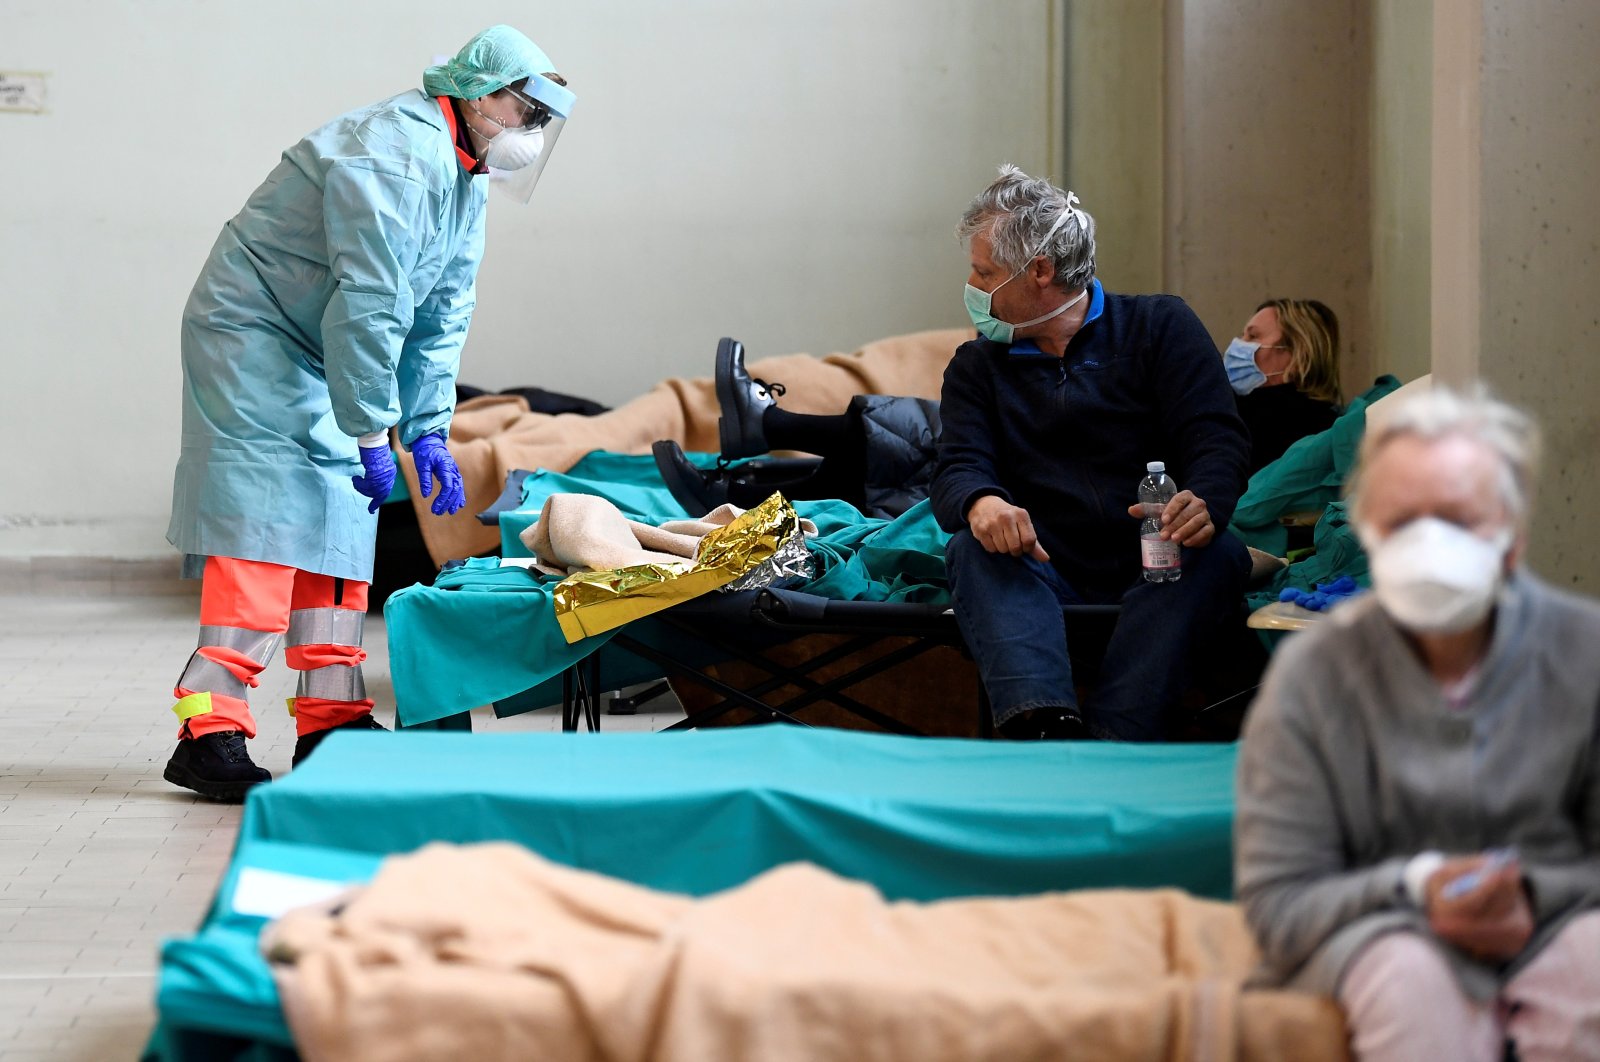 Medical personnel wearing protective face masks help patients inside the Spedali Civili hospital in Brescia, Italy March 13. (Reuters Photo)